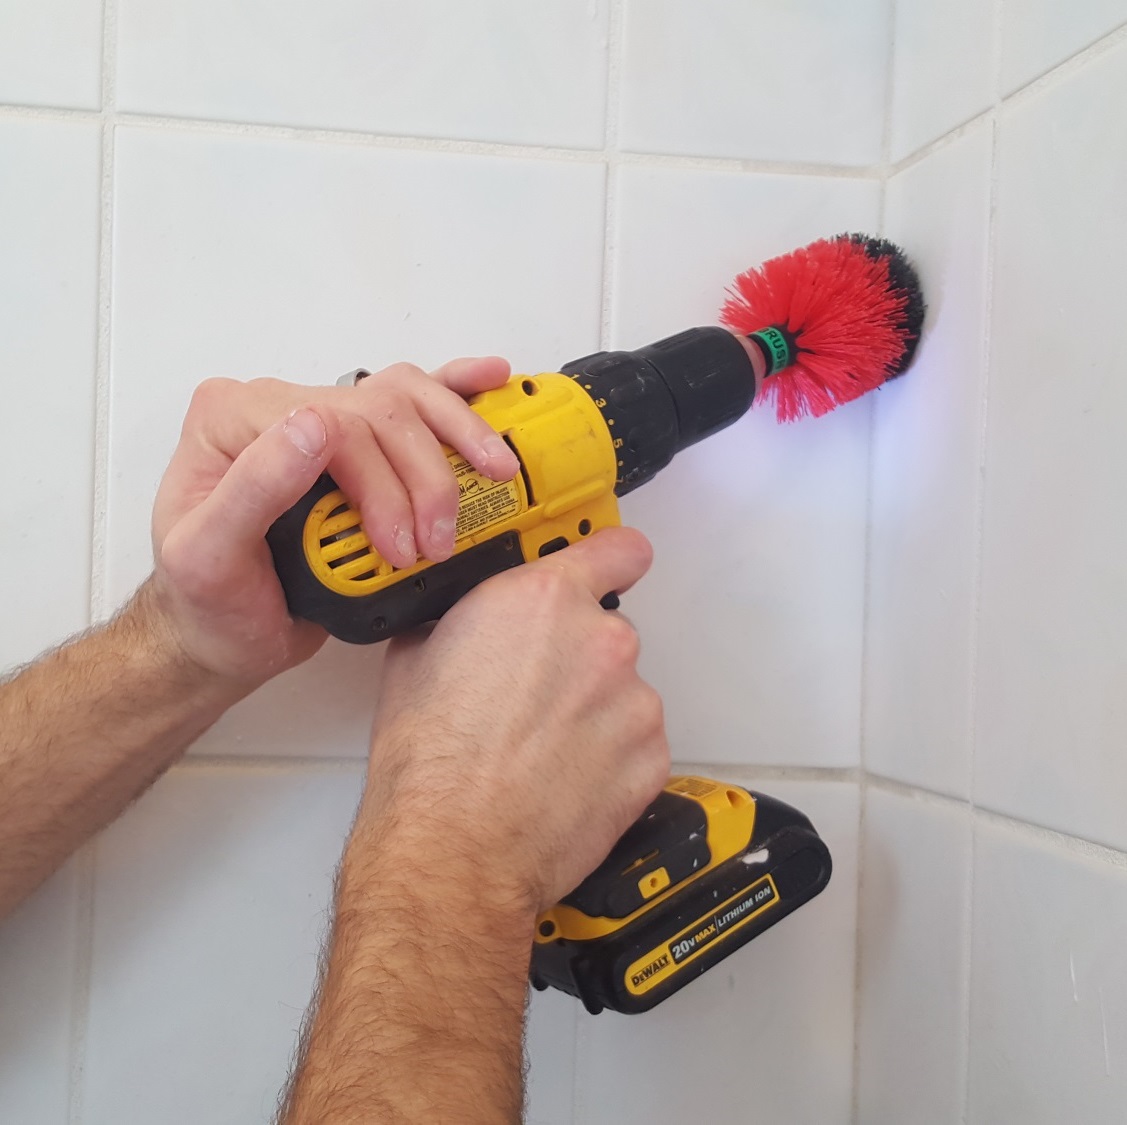 How to Clean Bathroom Tile Effectively — Bring It On Drill Brushes